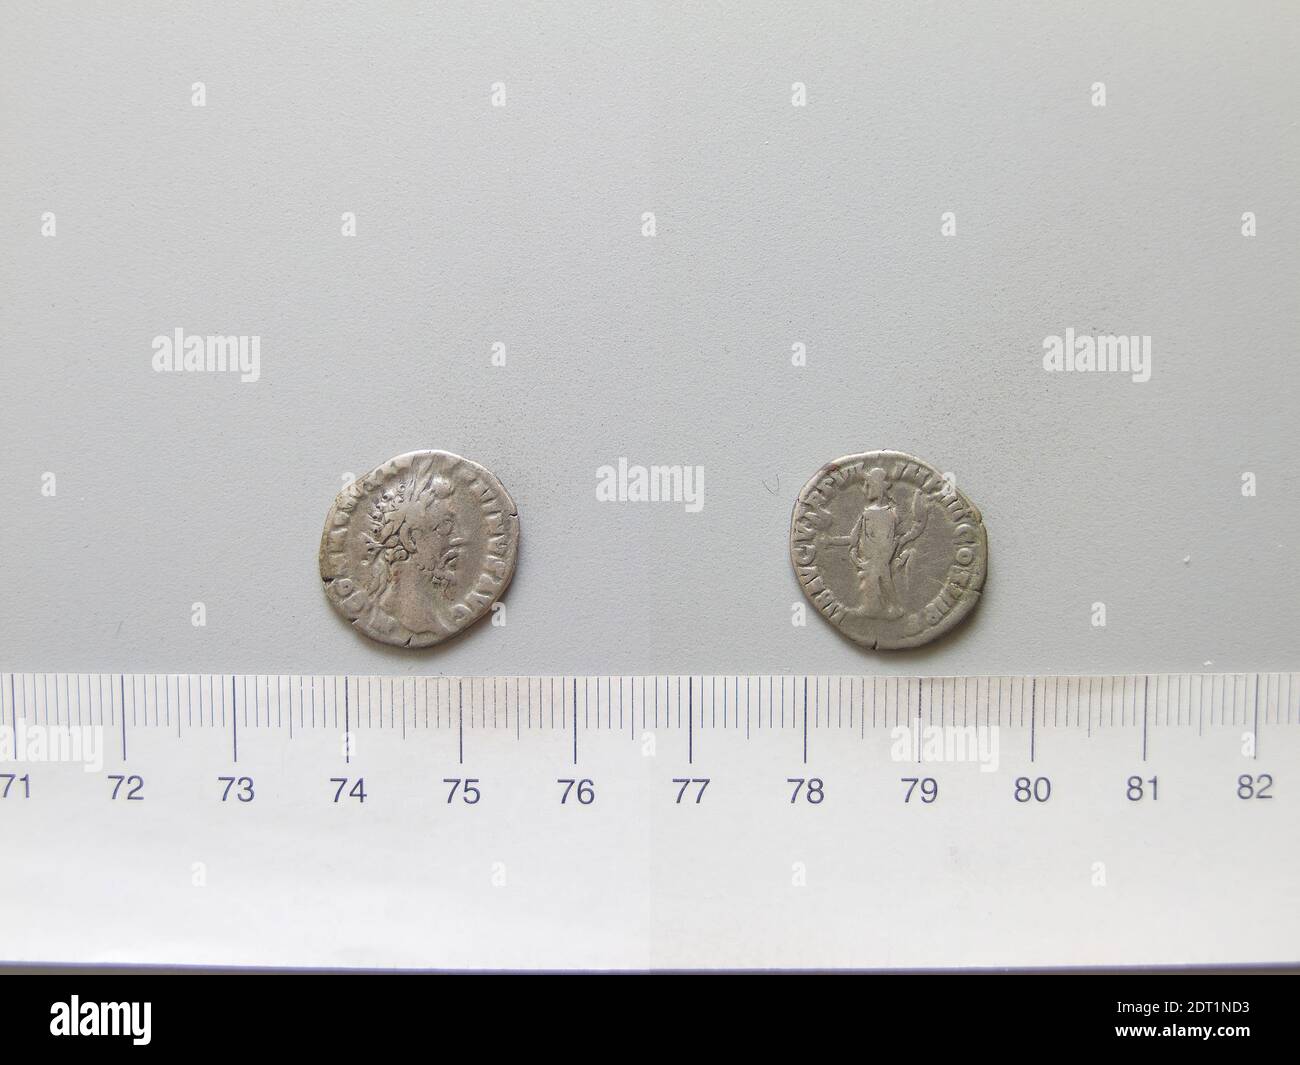 Ruler: Commodus, Emperor of Rome, A.D. 161–192, ruled 180–92, Mint: Rome, Denarius of Commodus, Emperor of Rome from Rome, 181–82, Silver, 2.42 g, 11:00, 17.9 mm, Made in Rome, Italy, Roman, 2nd century, Numismatics Stock Photo